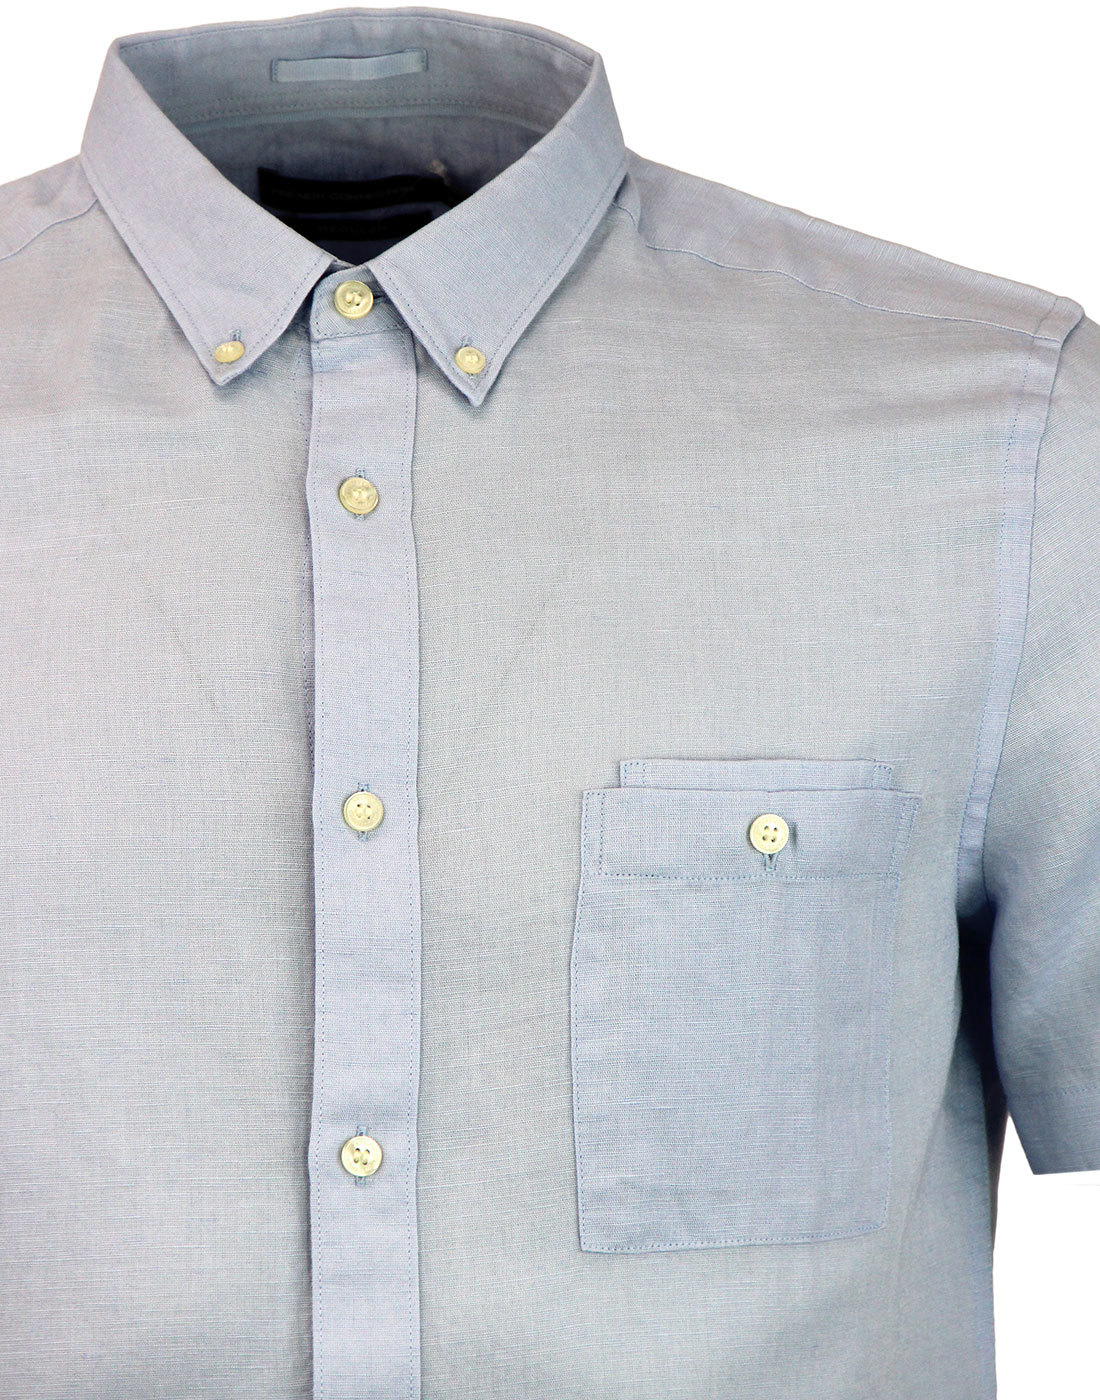 FRENCH CONNECTION Mens Retro Soft Cotton Linen Shirt in White